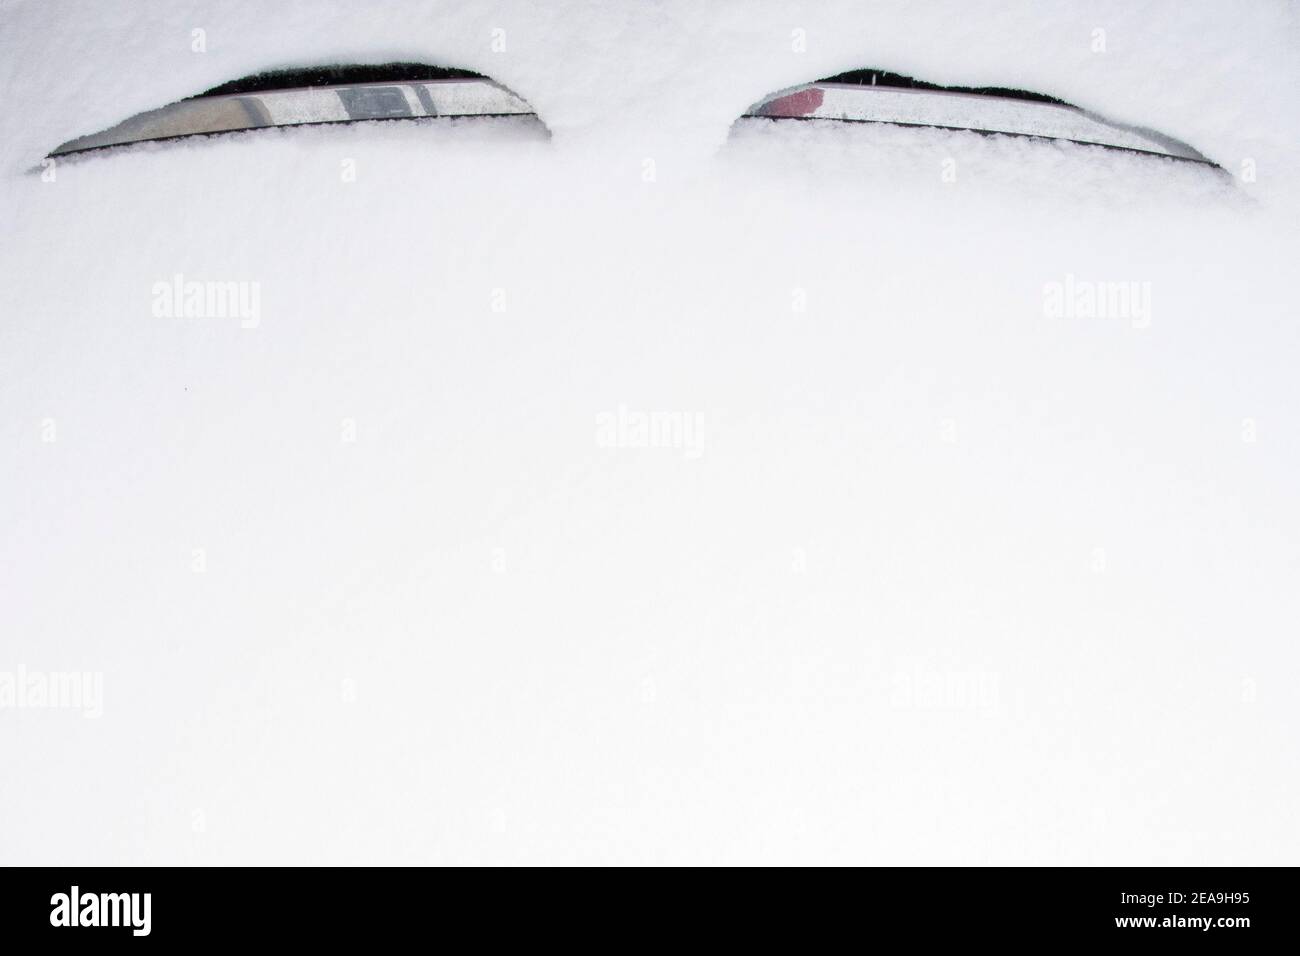 Poznan, Wielkopolska, Poland. 8th Feb, 2021. Winter attack in Poland. There are quite a few images around us that can cheer us up or make us reflect. Winter can be very photogenic. In the picture: eyes on the hood of the car. Credit: Dawid Tatarkiewicz/ZUMA Wire/Alamy Live News Stock Photo